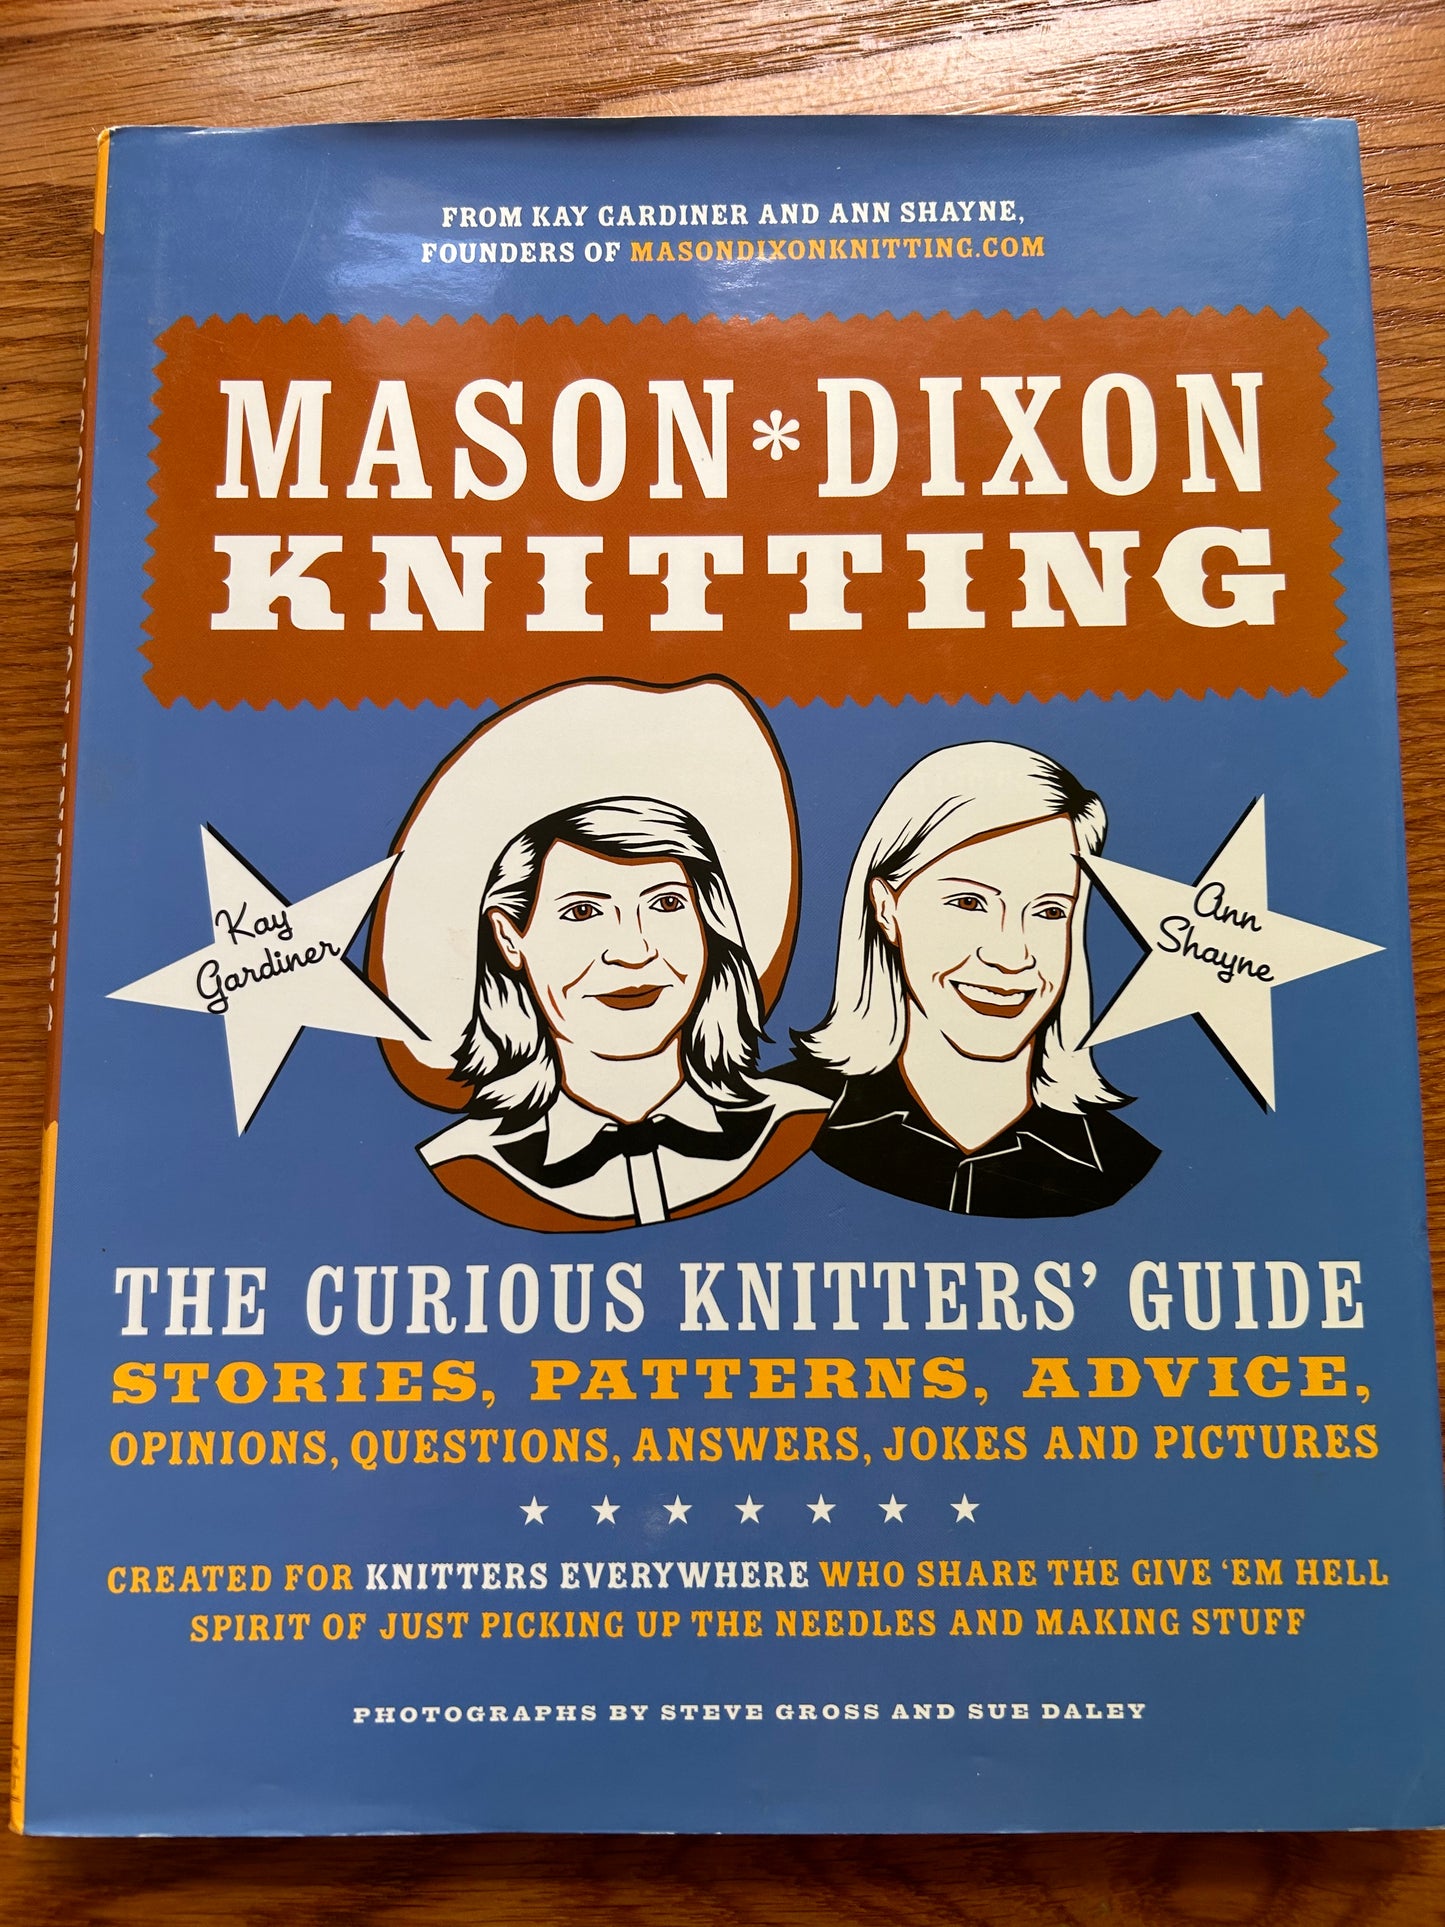 Mason-Dixon Knitting: The Curious Knitters' Guide